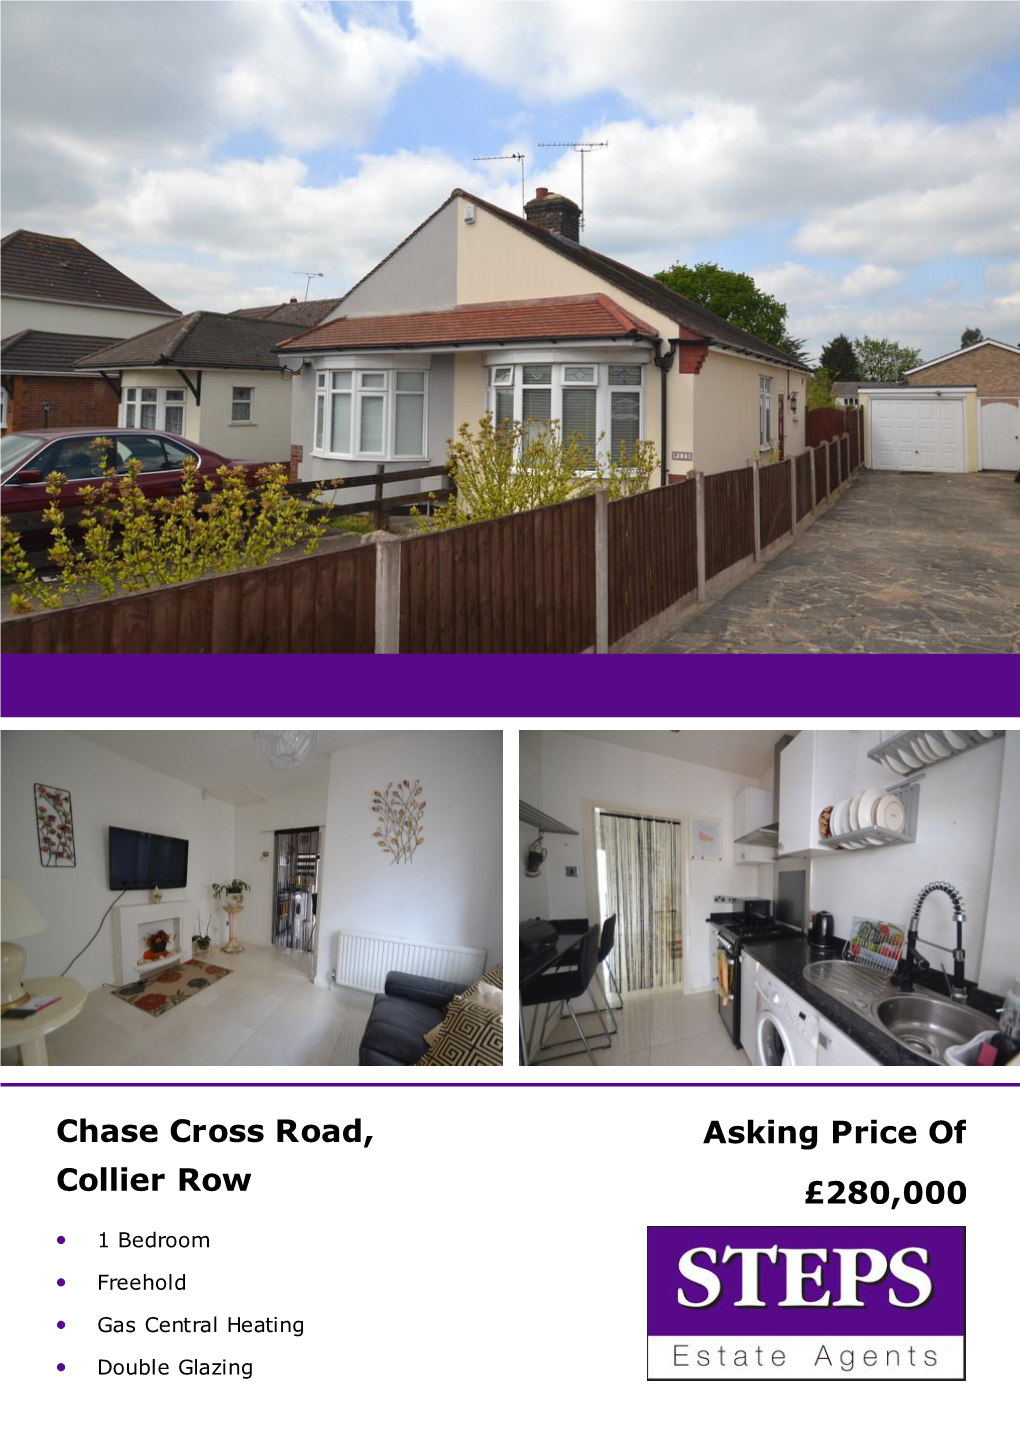 Asking Price of £280,000 Chase Cross Road, Collier